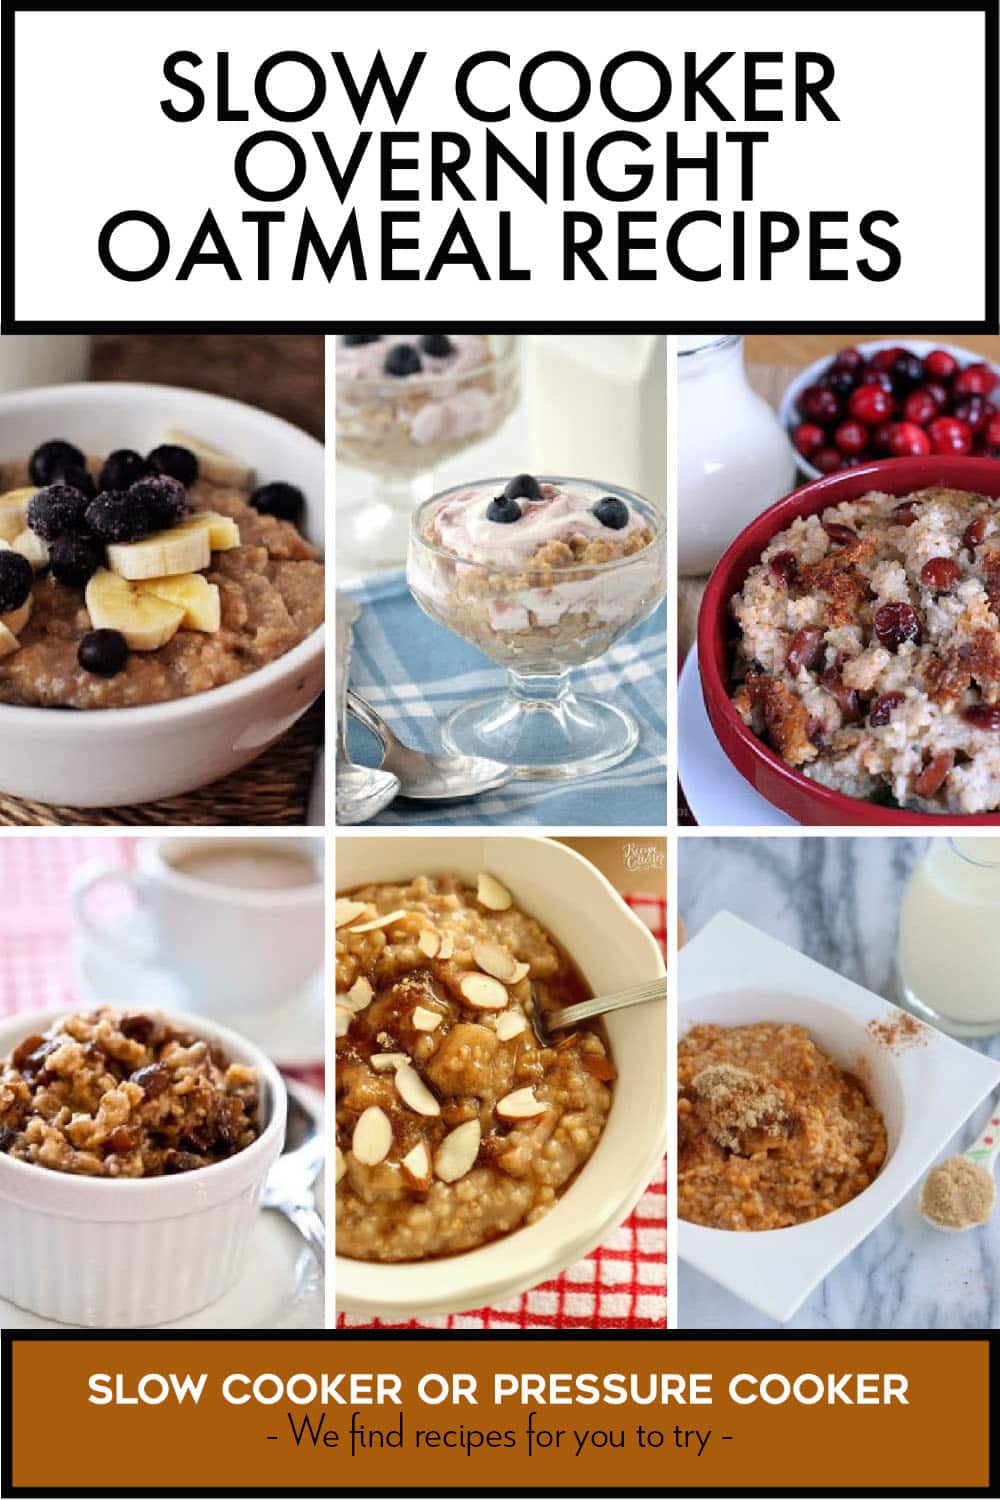 4 Healthy and Easy Overnight Oats Recipes + video - Carmy - Easy